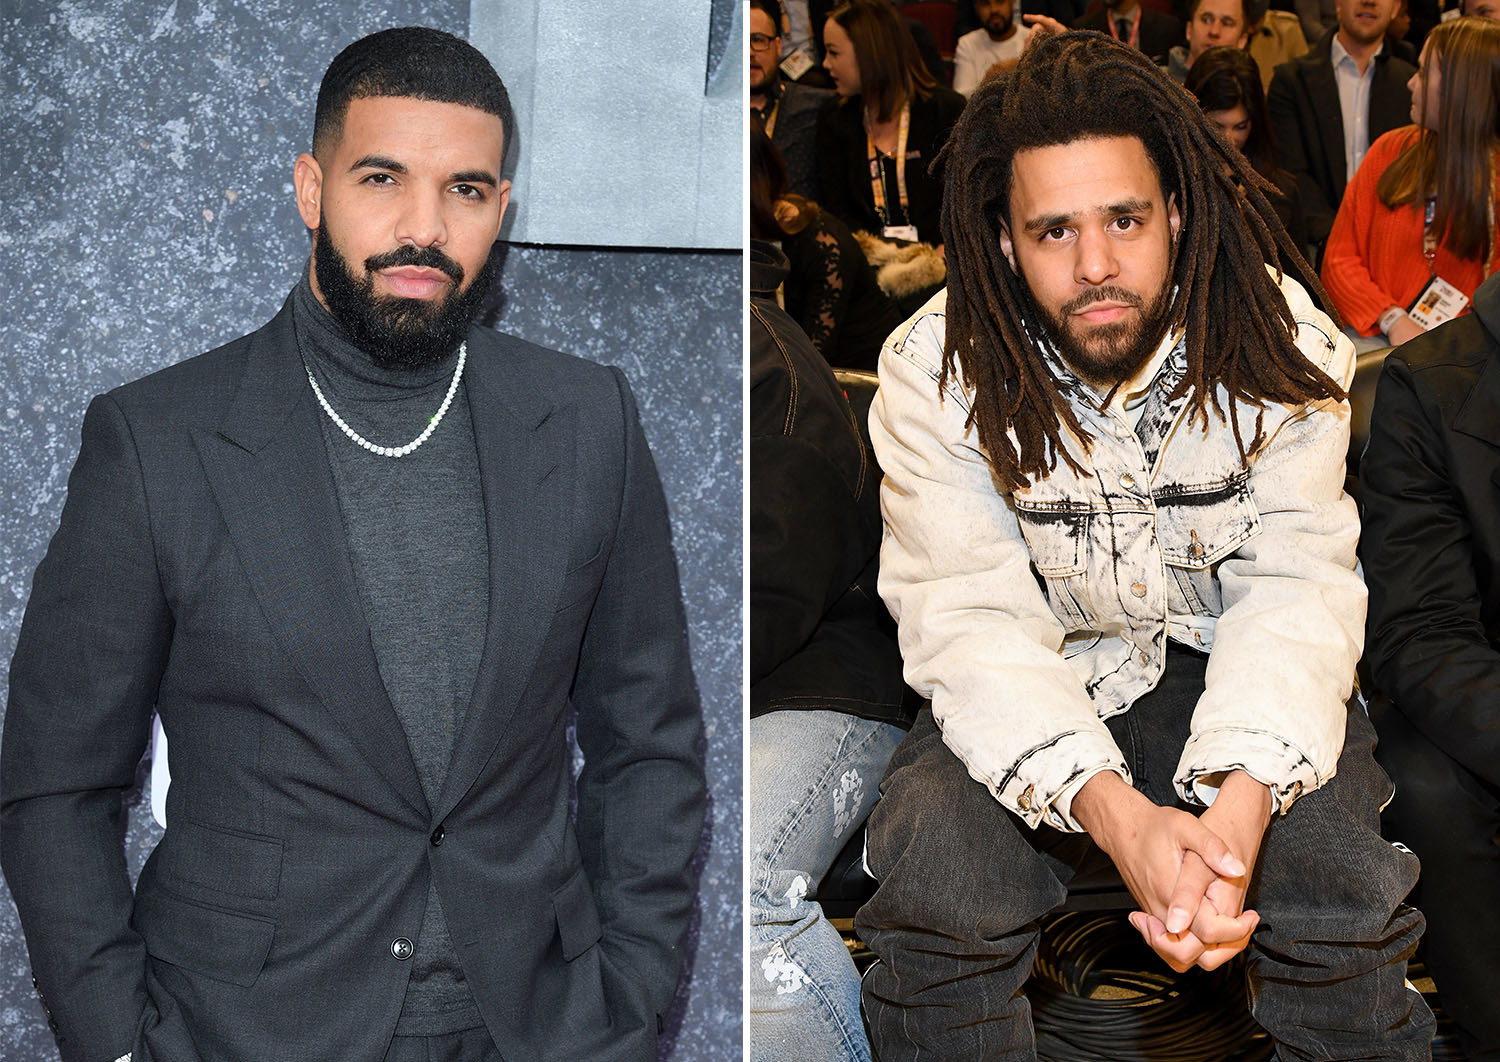 Drake in a turtleneck and suit, J Cole kneeling with hands clasped